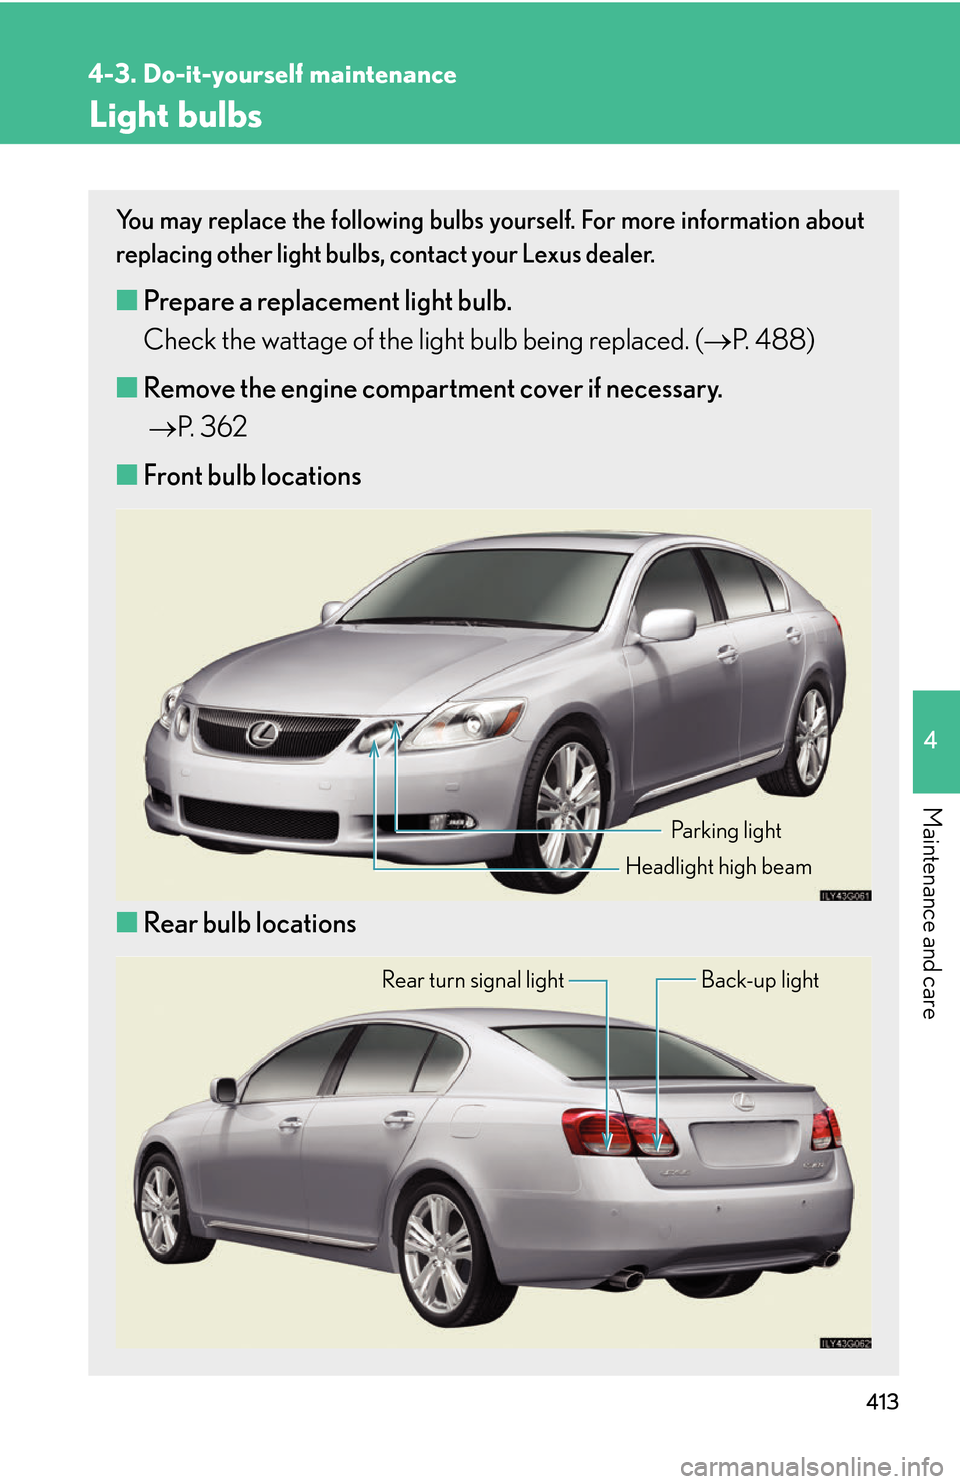 Lexus GS450h 2007  Using the audio system / LEXUS 2007 GS450H THROUGH JUNE 2006 PROD. OWNERS MANUAL (OM30727U) 413
4-3. Do-it-yourself maintenance
4
Maintenance and care
Light bulbs
You may replace the following bulbs yourself. For more information about 
replacing other light bulbs, contact your Lexus dealer.